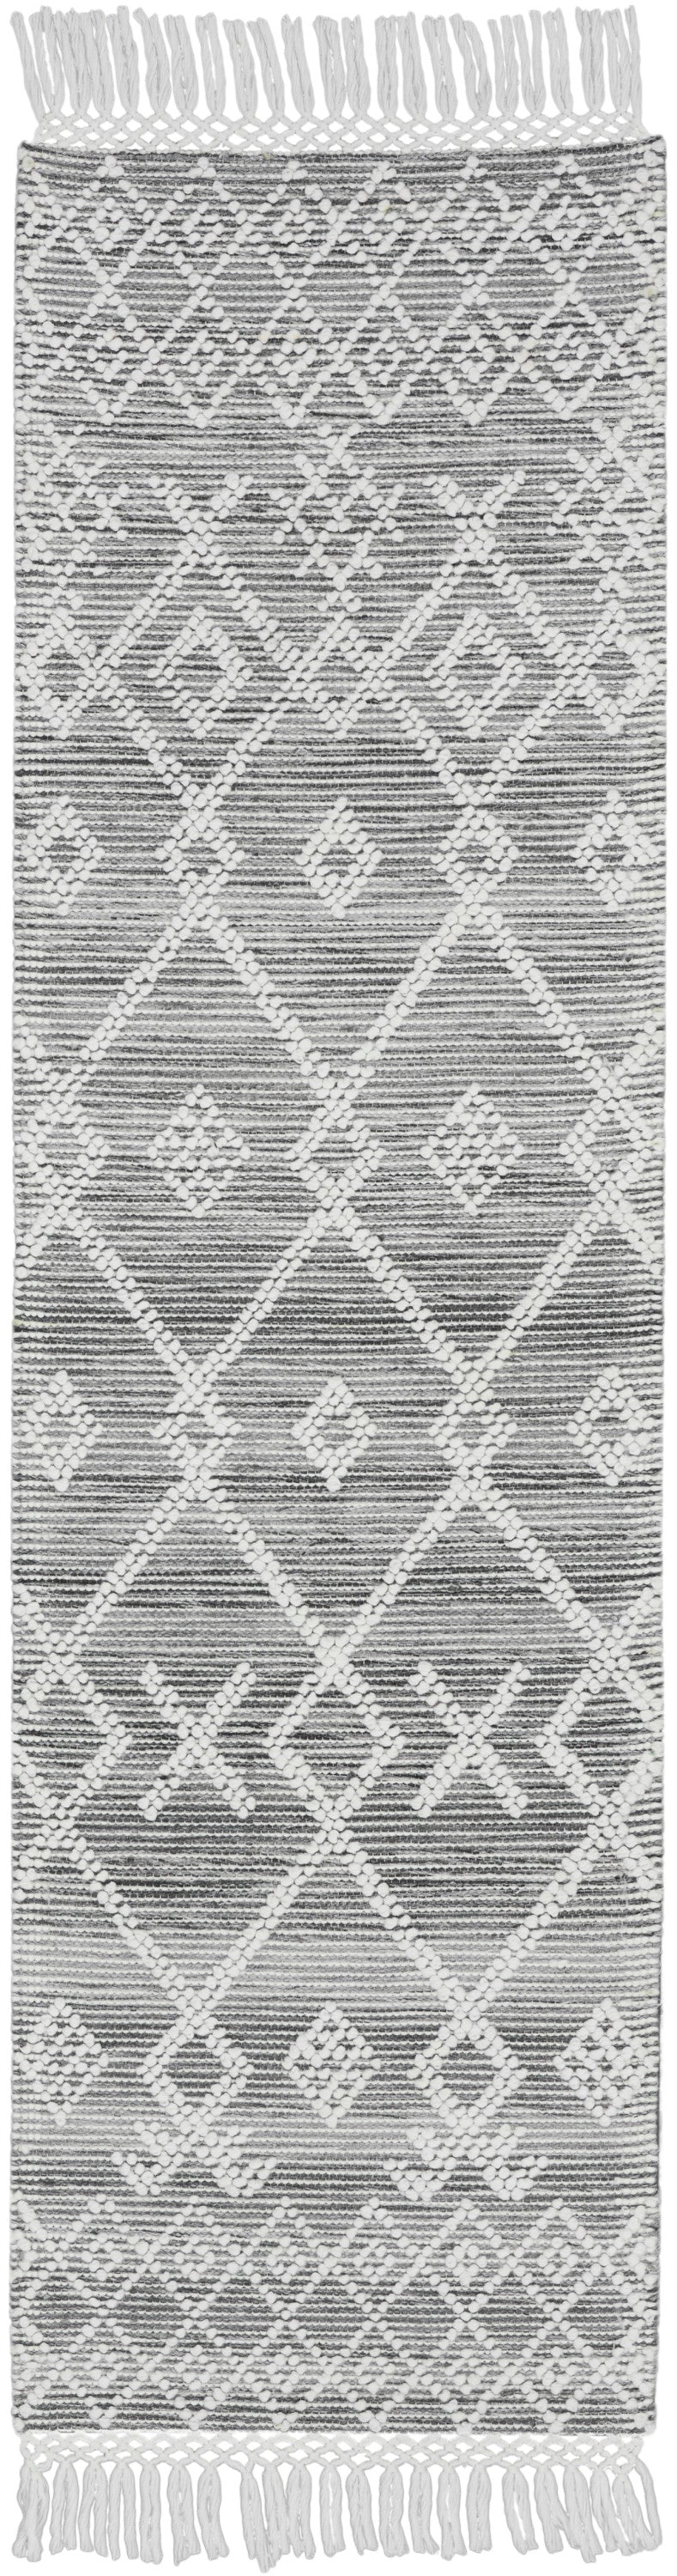 Nicole Curtis Series 3 SR302 Grey Ivory  Contemporary Woven Rug